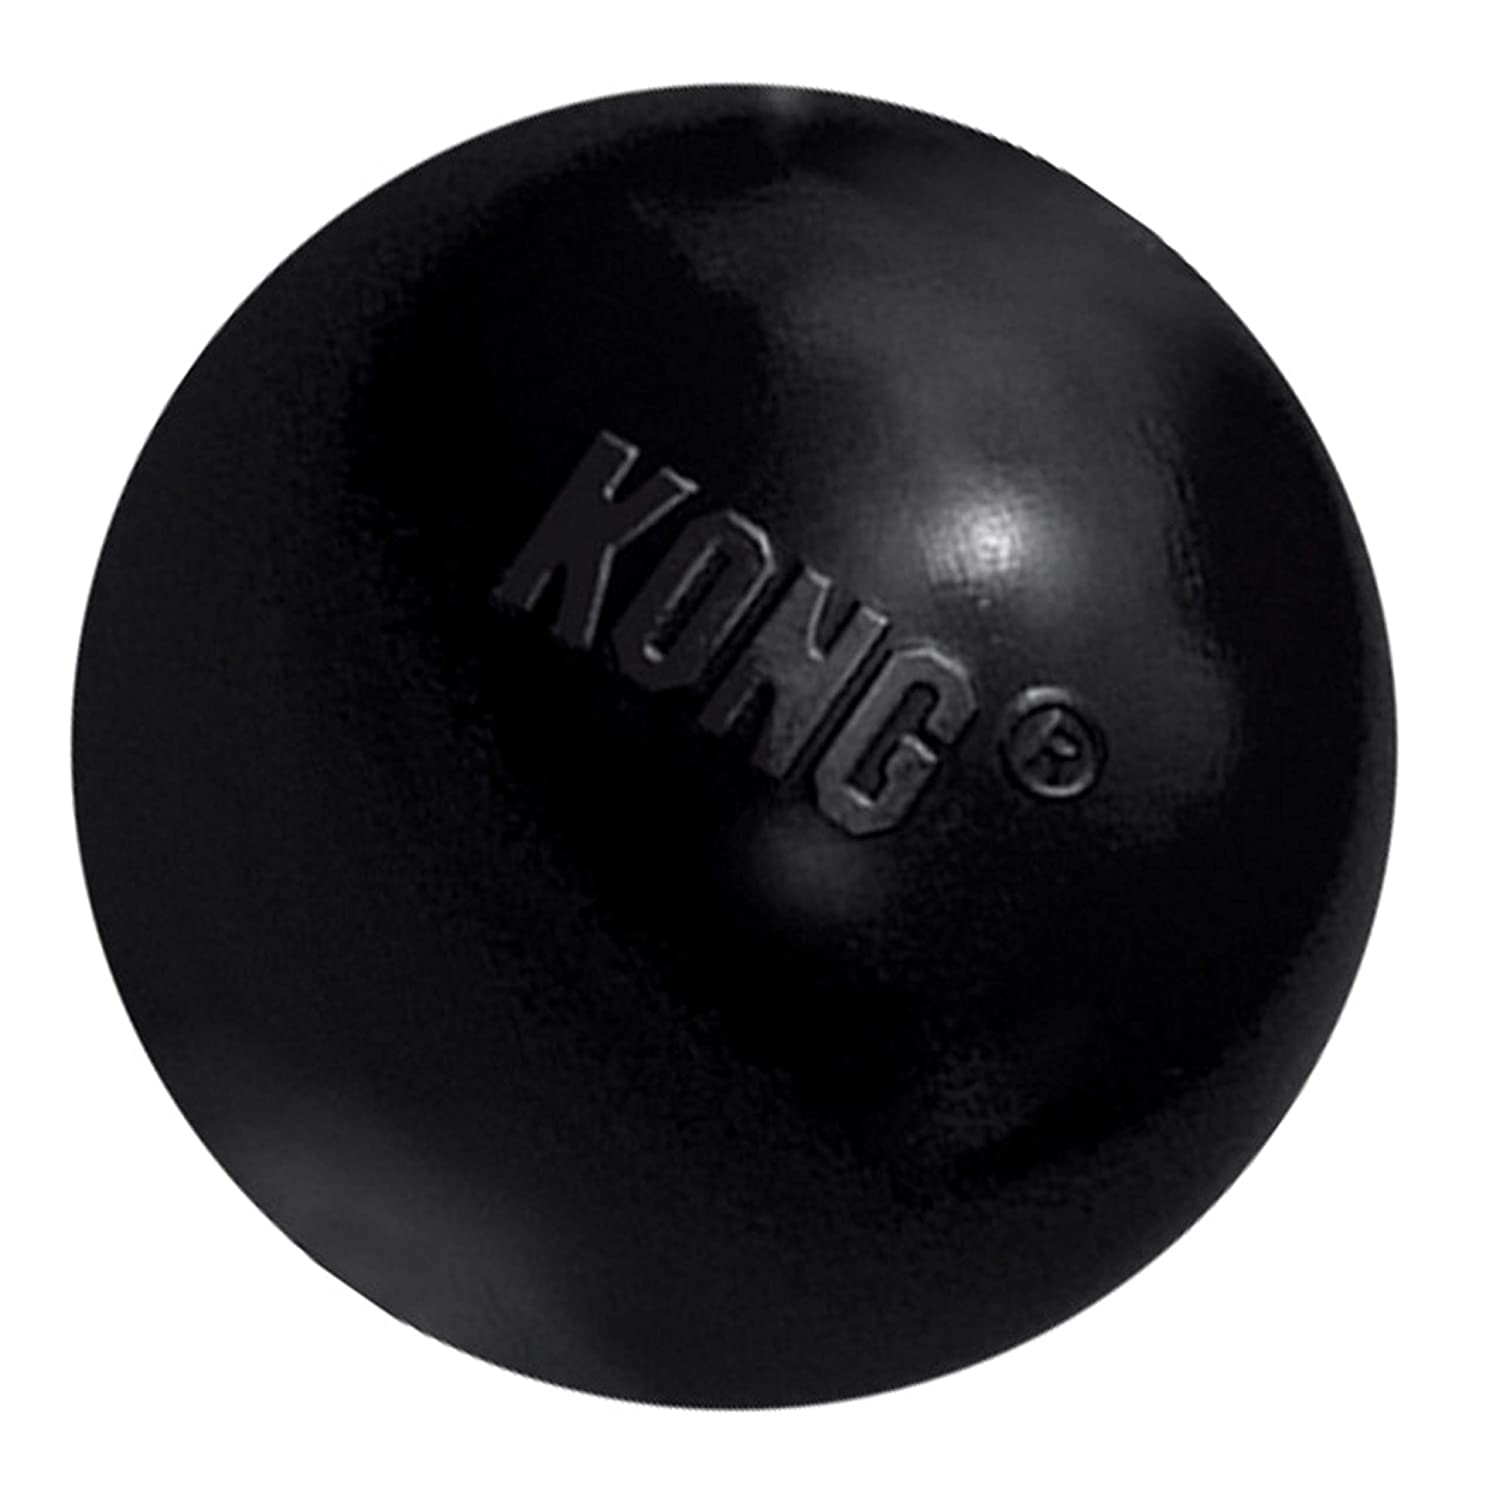 KONG Rubber Ball Extreme